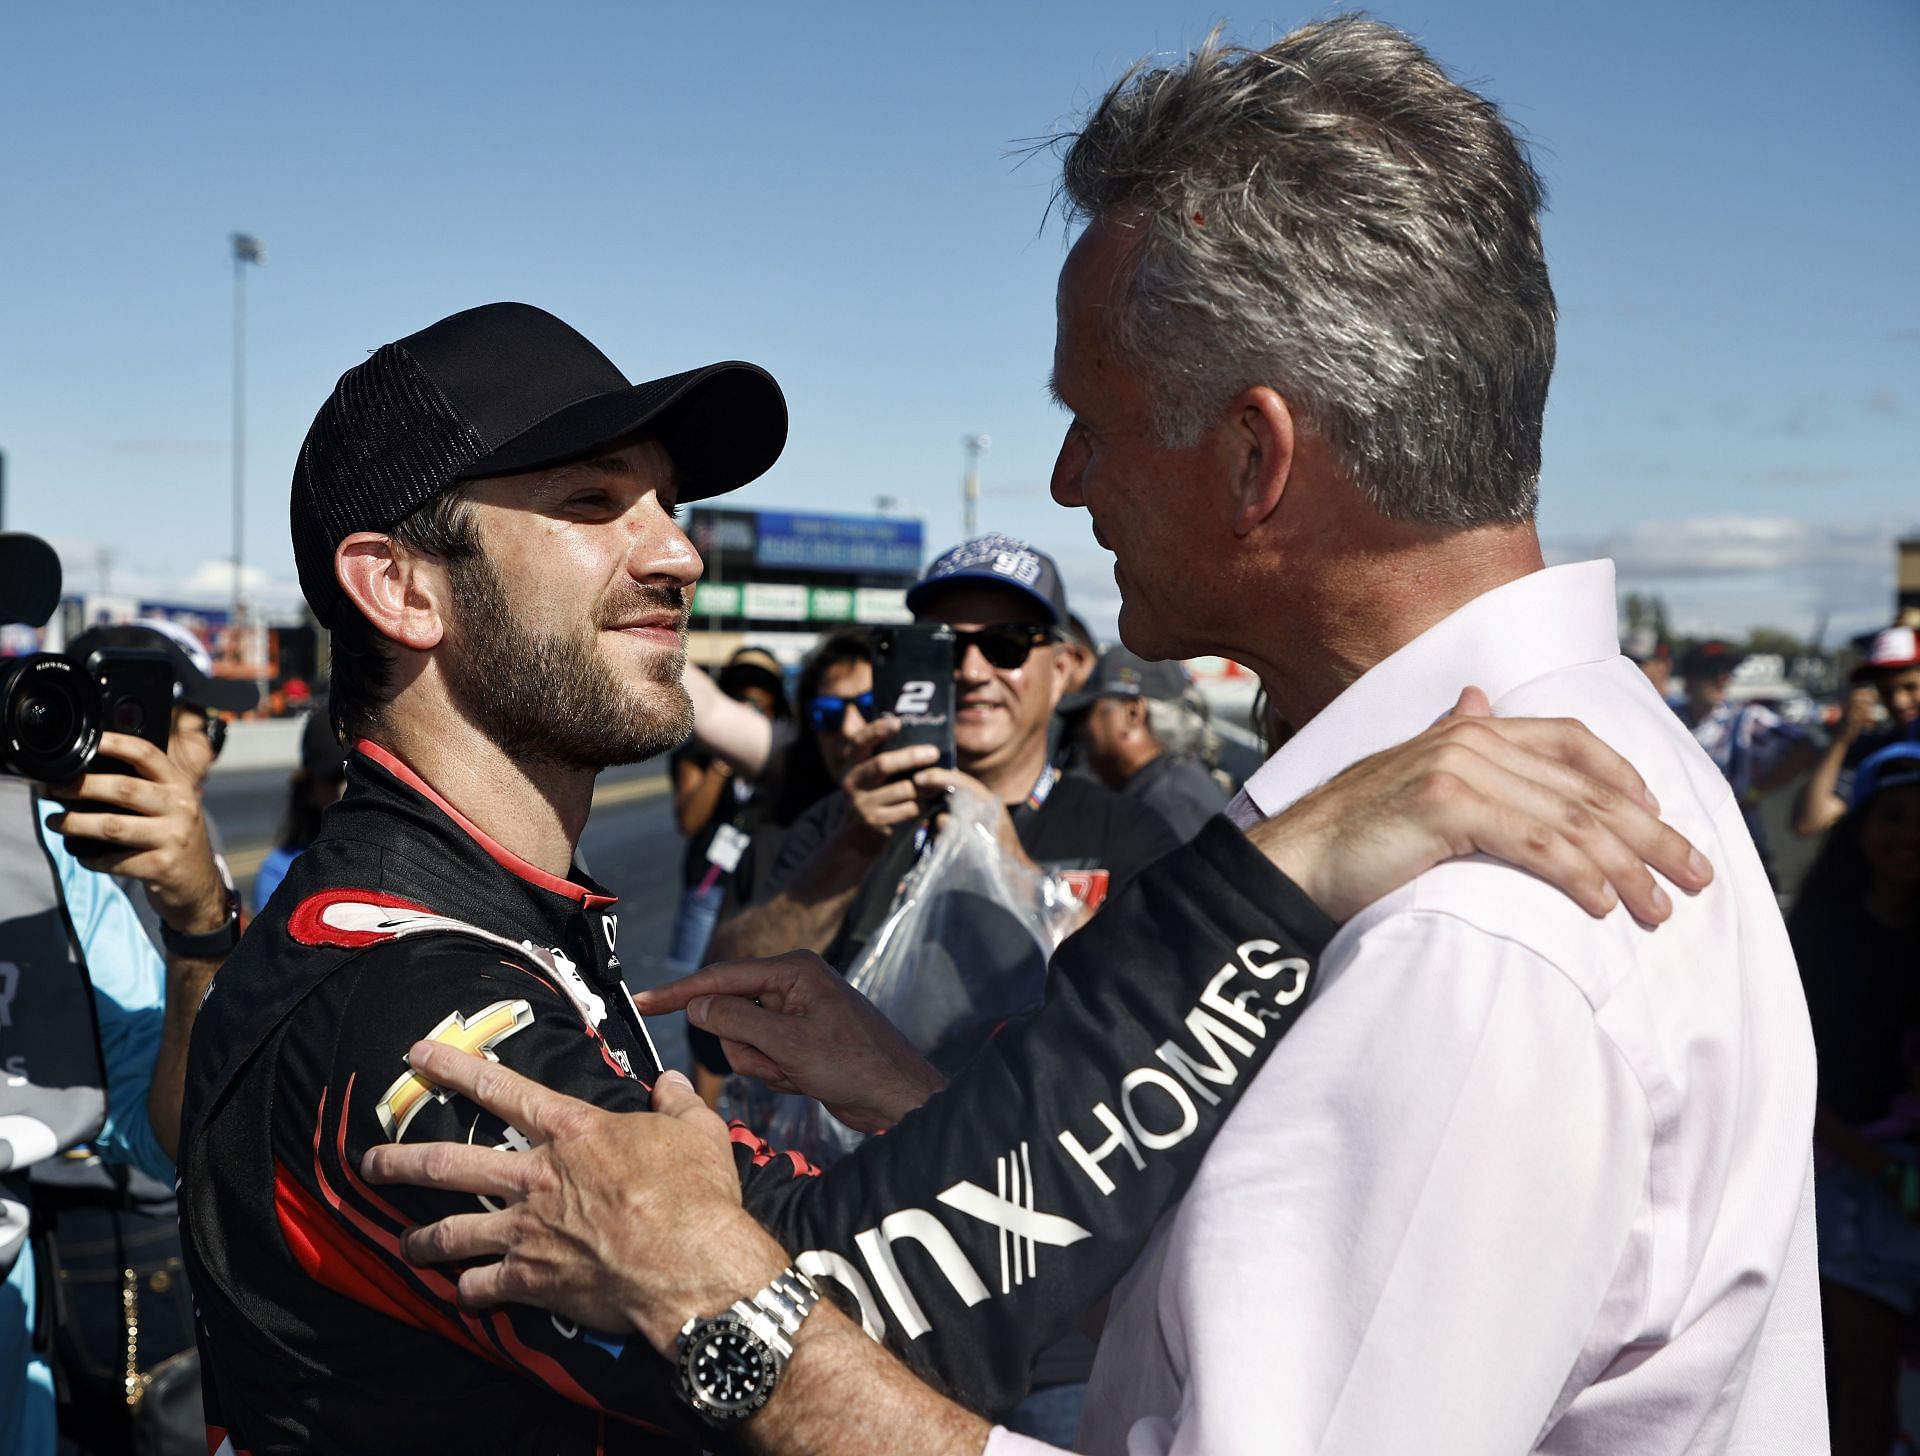 Daniel Suarez is congratulated by NASCAR president Steve Phelps after winning the NASCAR Cup Series Toyota/Save Mart 350 at Sonoma Raceway